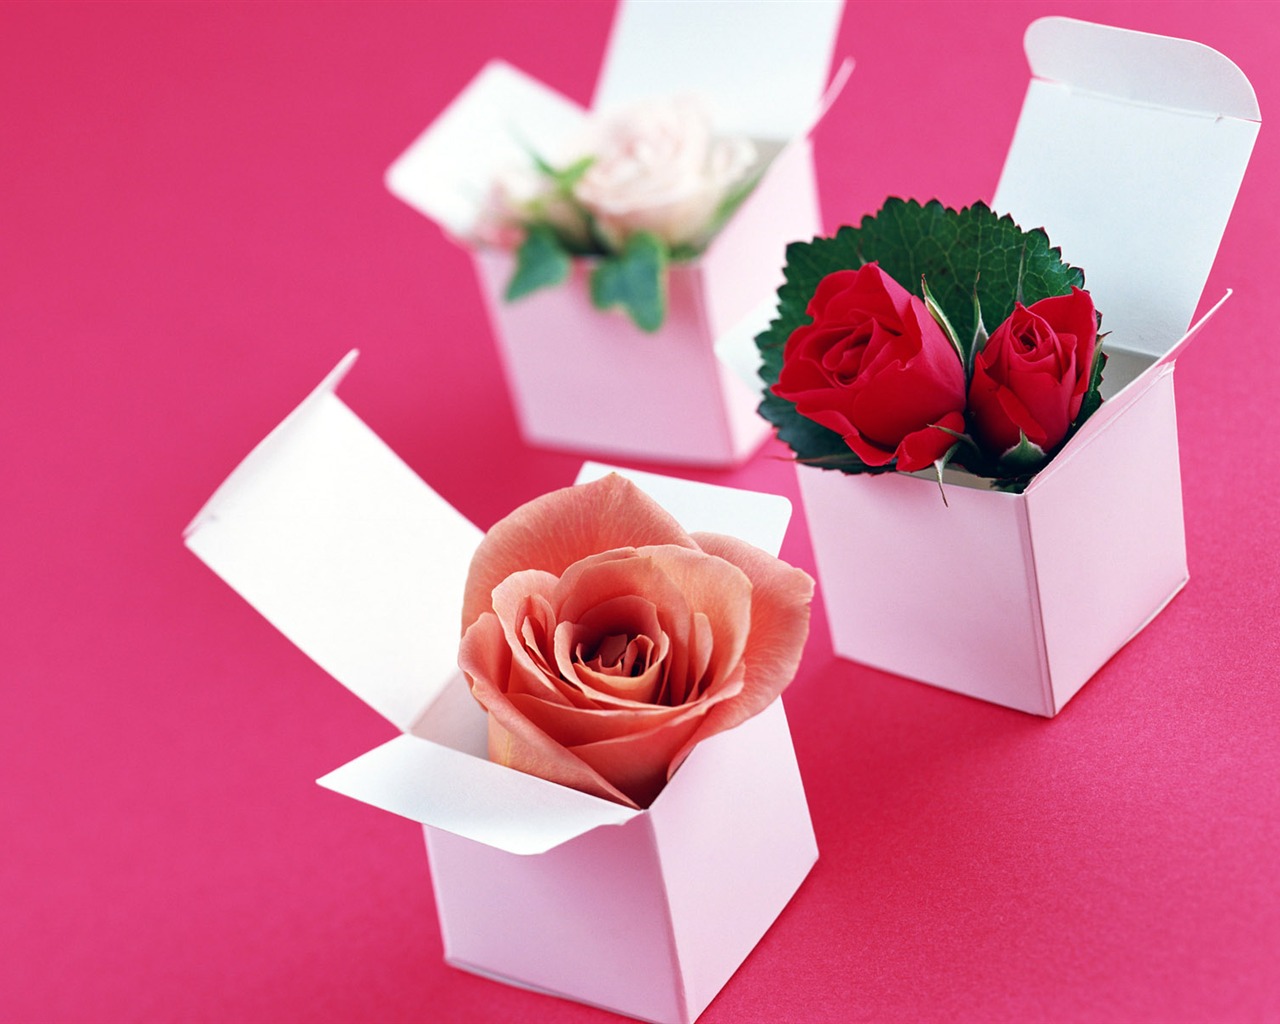 Flowers and gifts wallpaper (1) #1 - 1280x1024